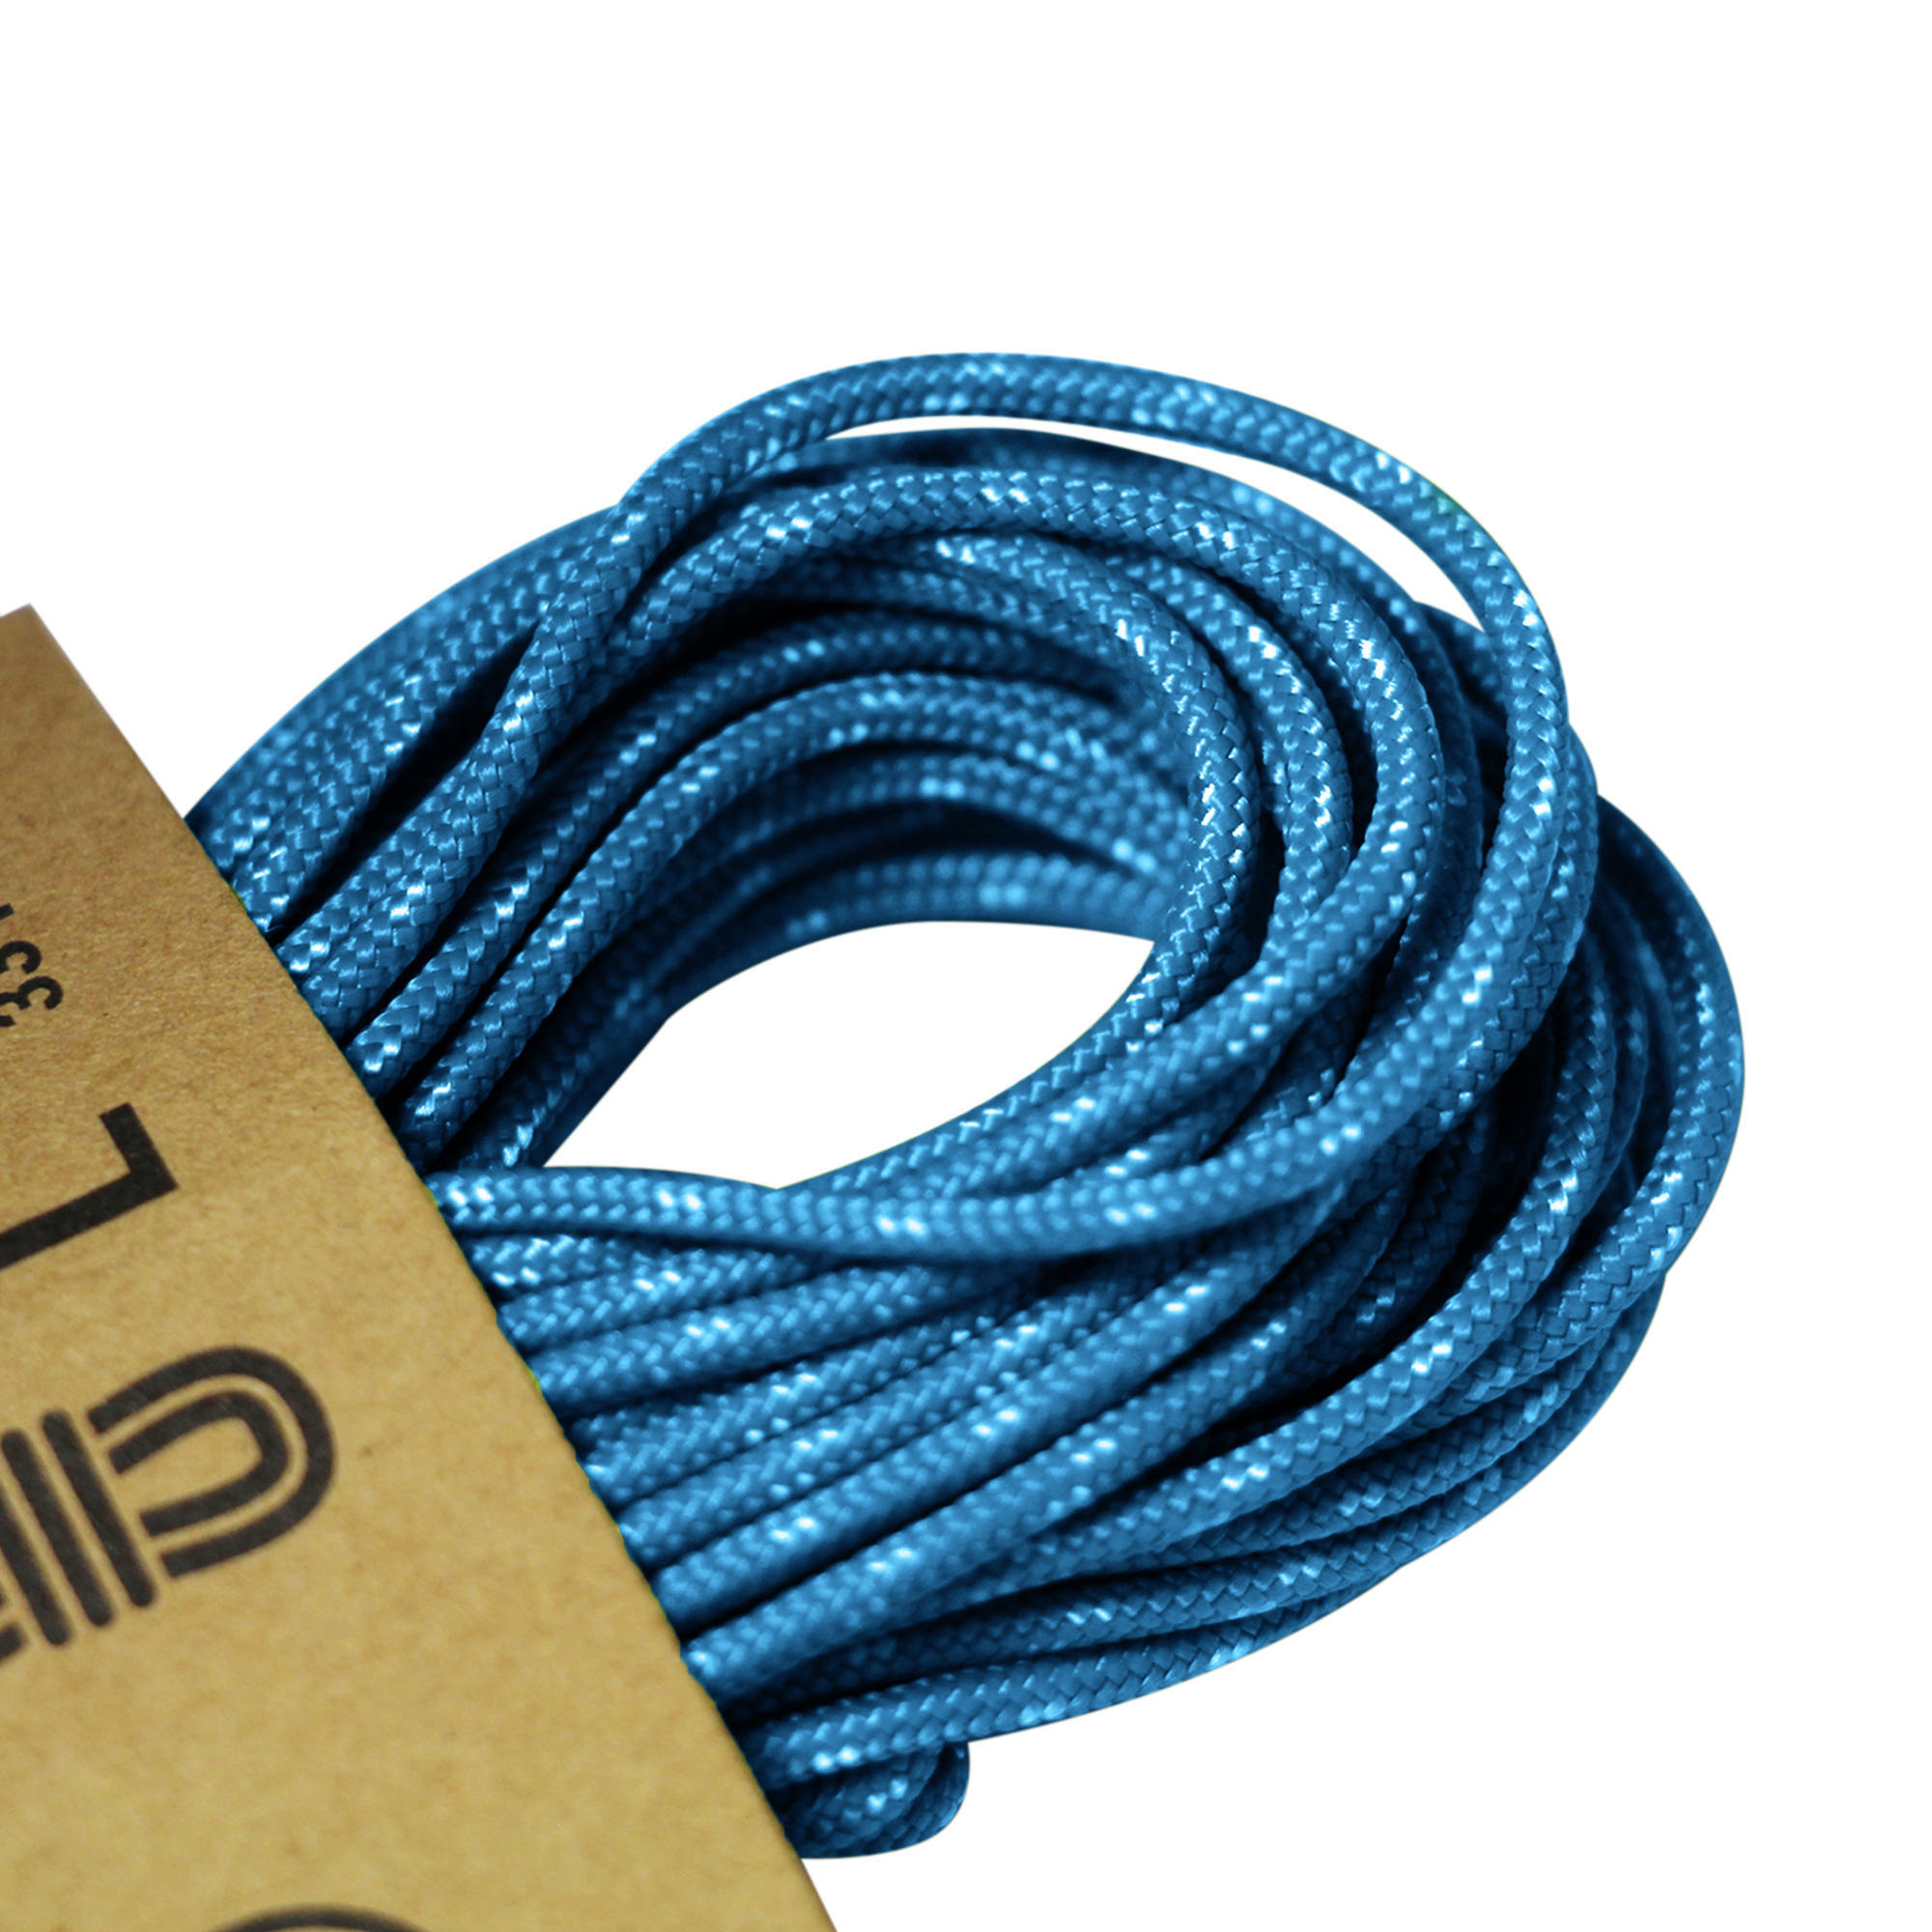 Climbing and Mountaineering Cordelette 2 mm x 10 m - Blue 2/2